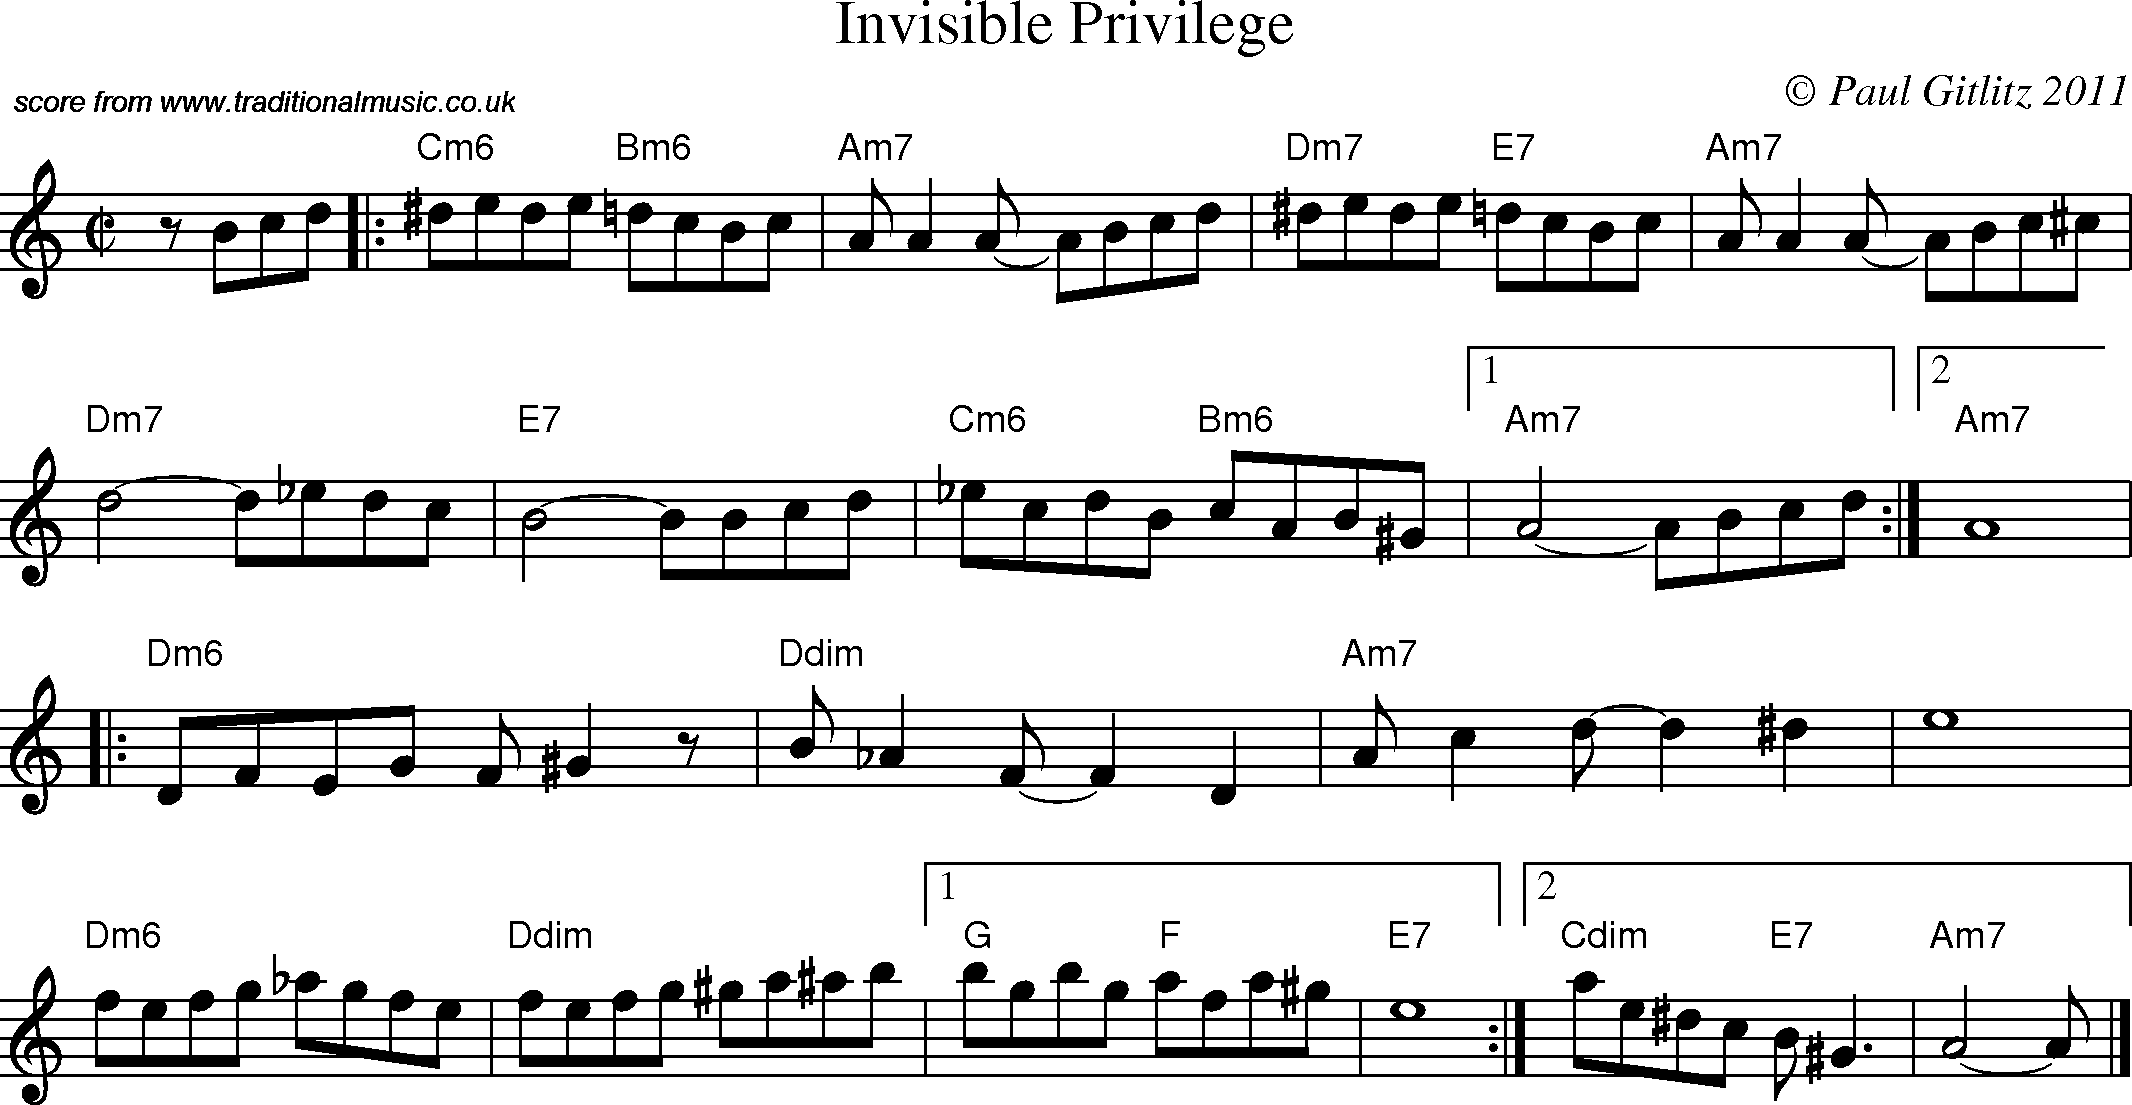 Sheet Music Score for Swing - Invisible Privilege